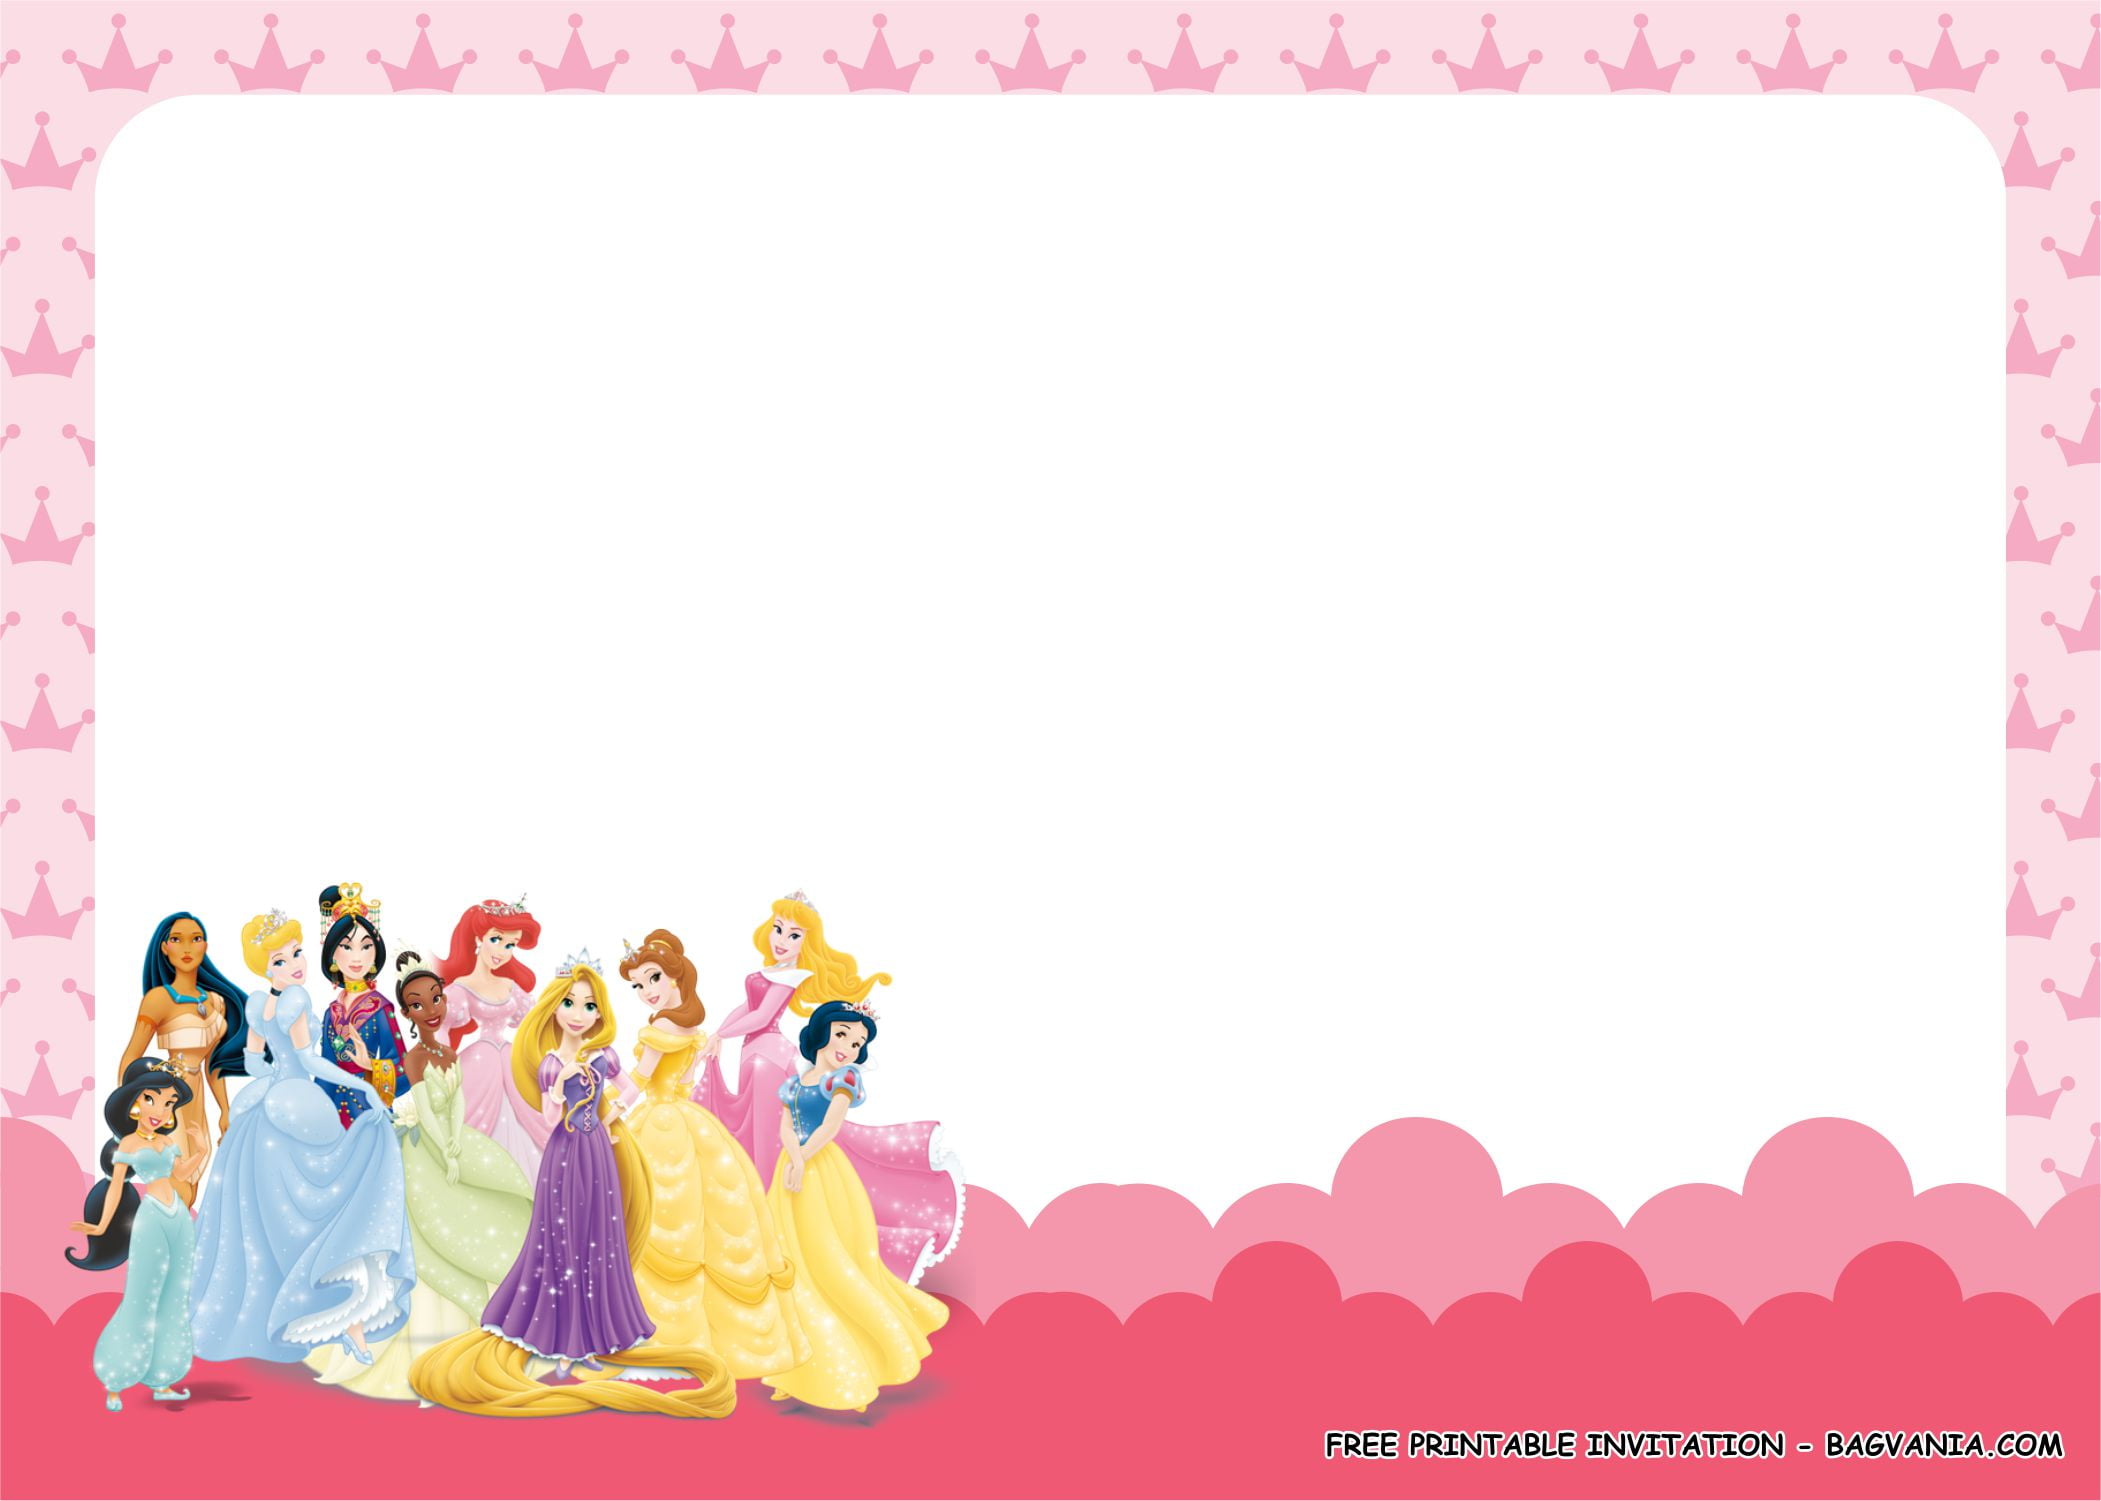 10 Princess Birthday Party Ideas That You Will Love FREE Printable